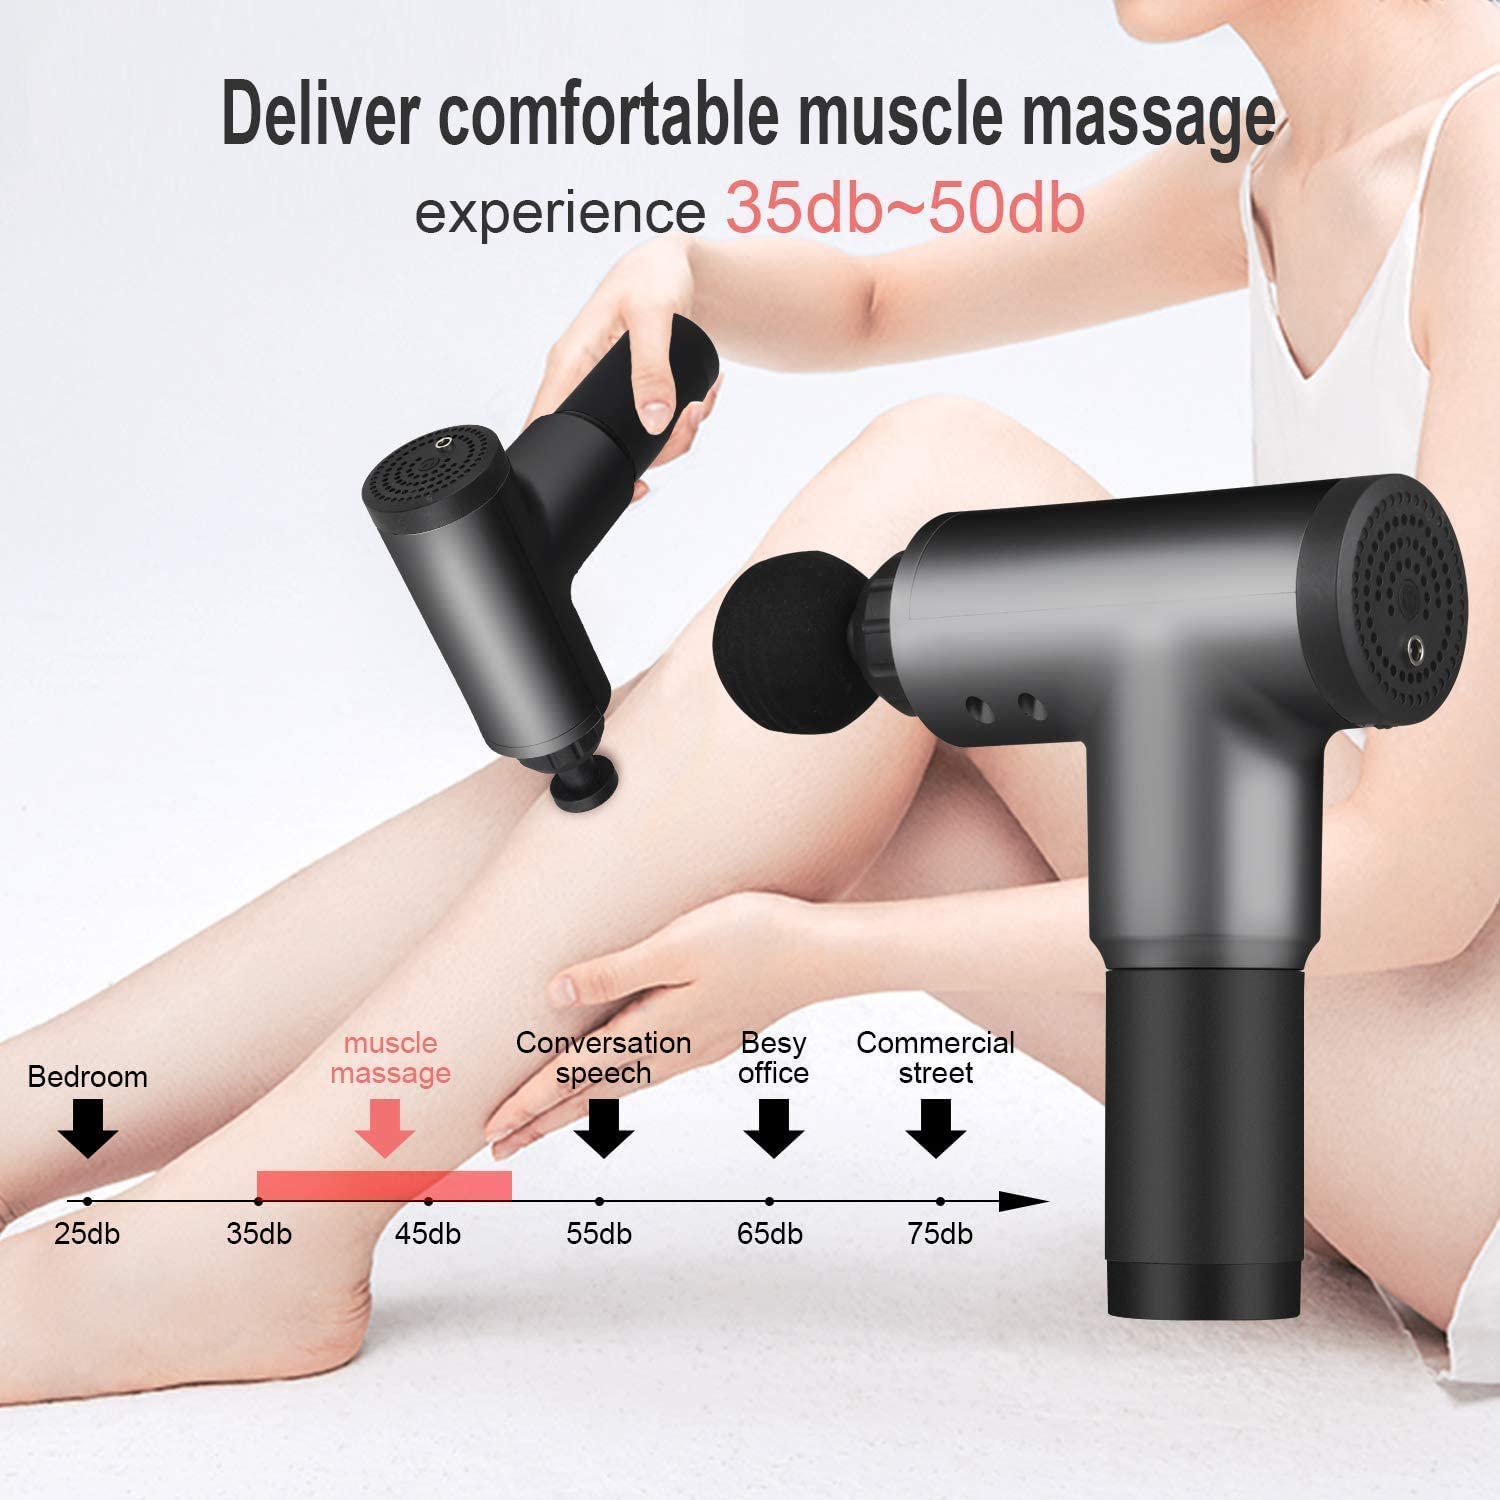 Cotsoco Massage Gun, Percussion Massage Device Cordless Handheld Vibration Deep Tissue Muscle Massager Gun, Super Quiet Brushless Motor, with 4 Massage Heads and 6 Adjustable Speed, Black